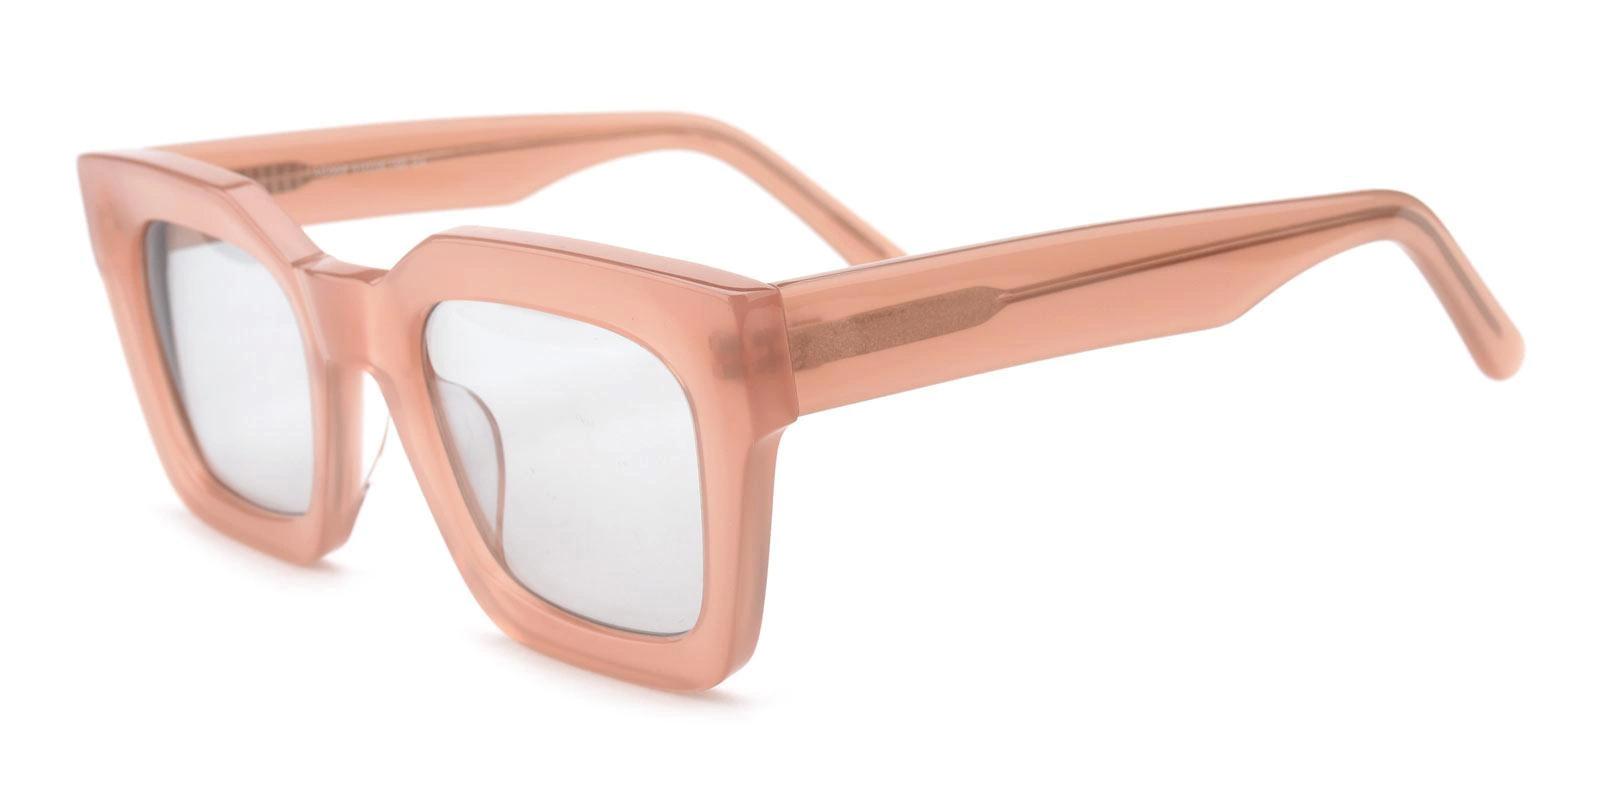 Pagintion Pink Acetate Sunglasses , UniversalBridgeFit Frames from ABBE Glasses